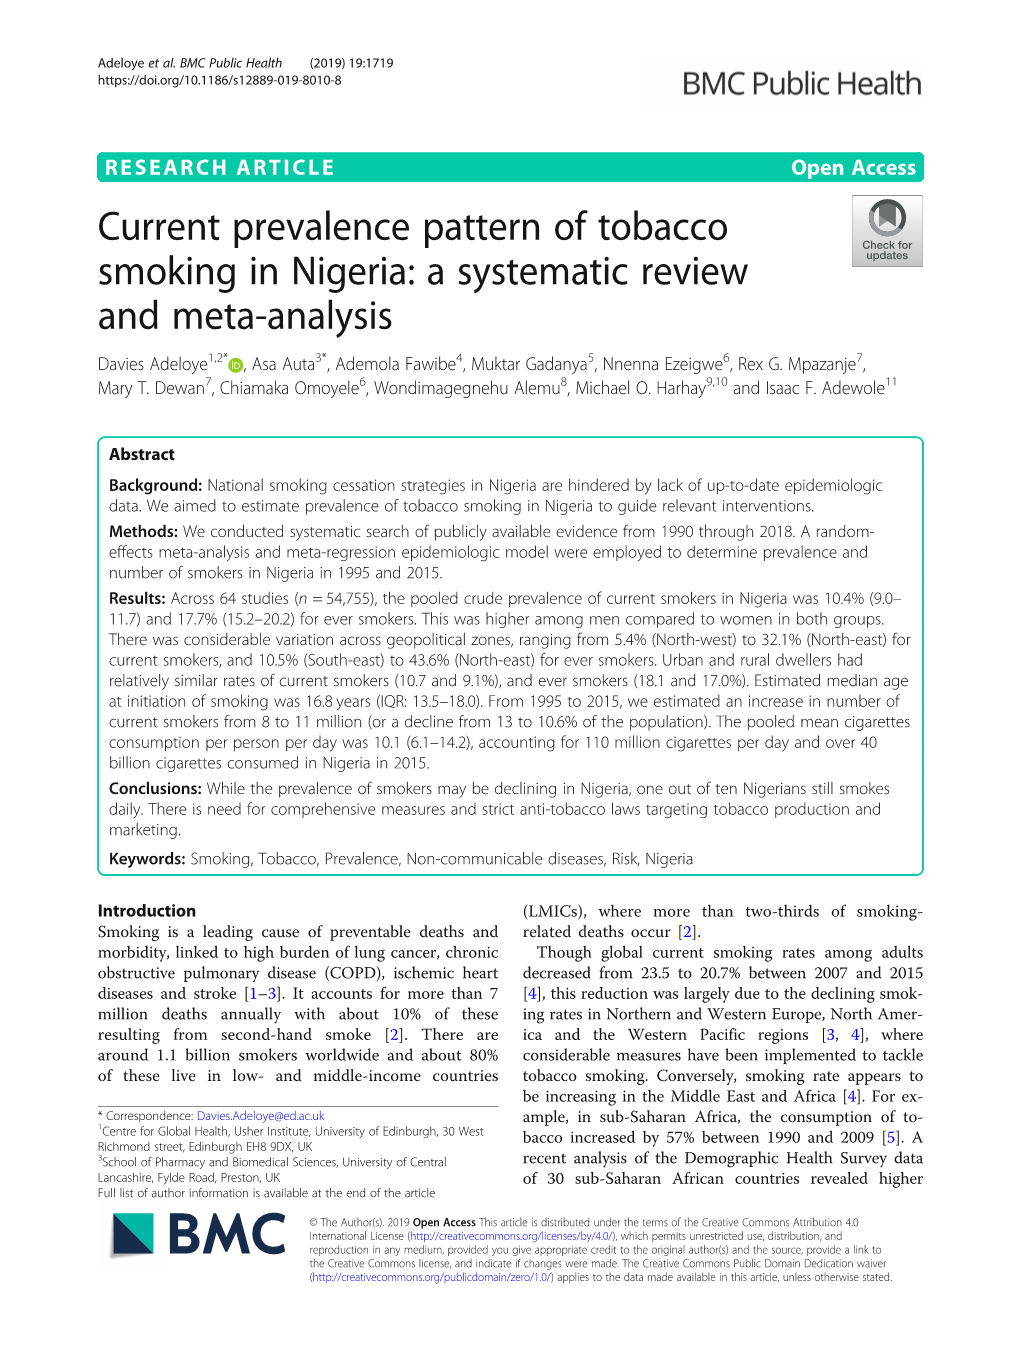 Current Prevalence Pattern of Tobacco Smoking in Nigeria